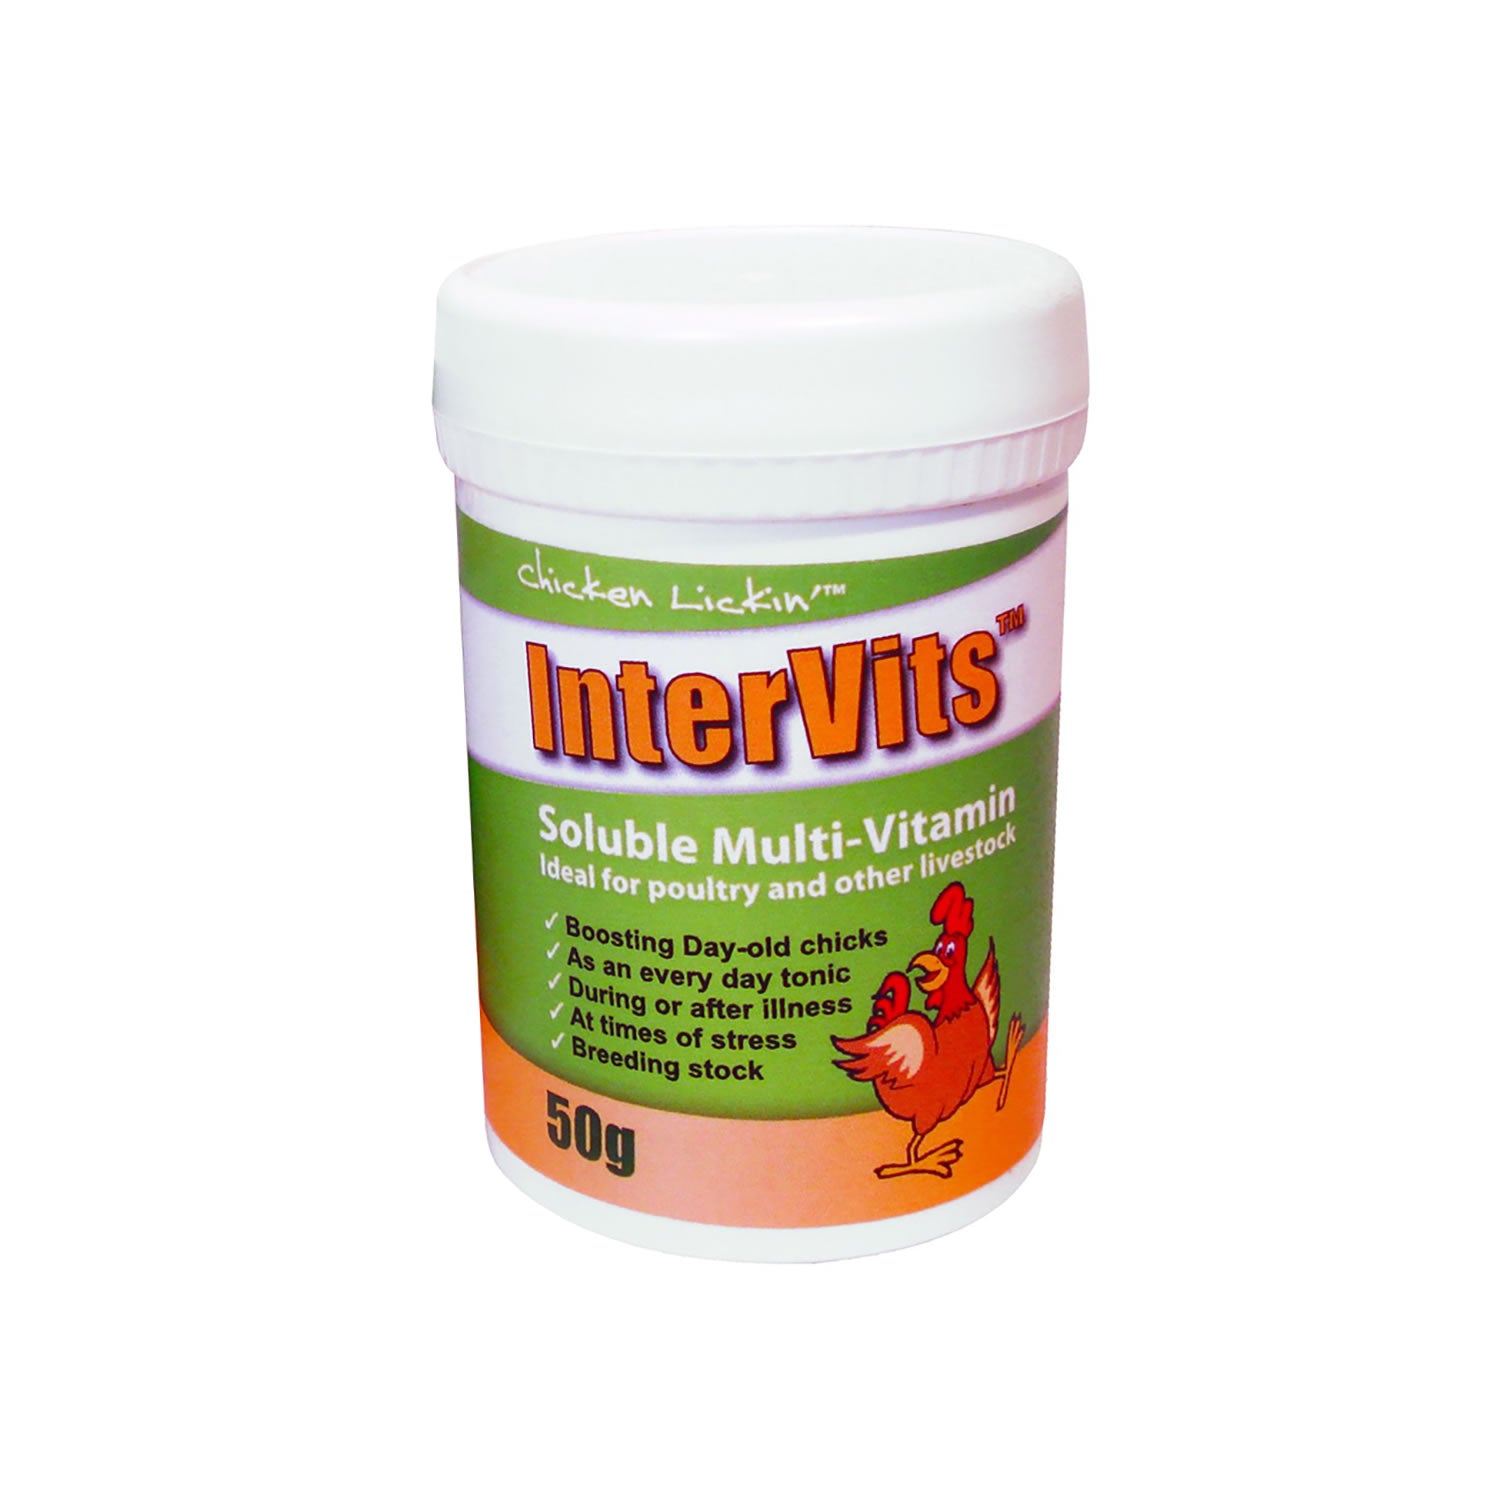 Agrivite Chicken Lickin' Intervits Soluble Multivitamins- Various Sizings